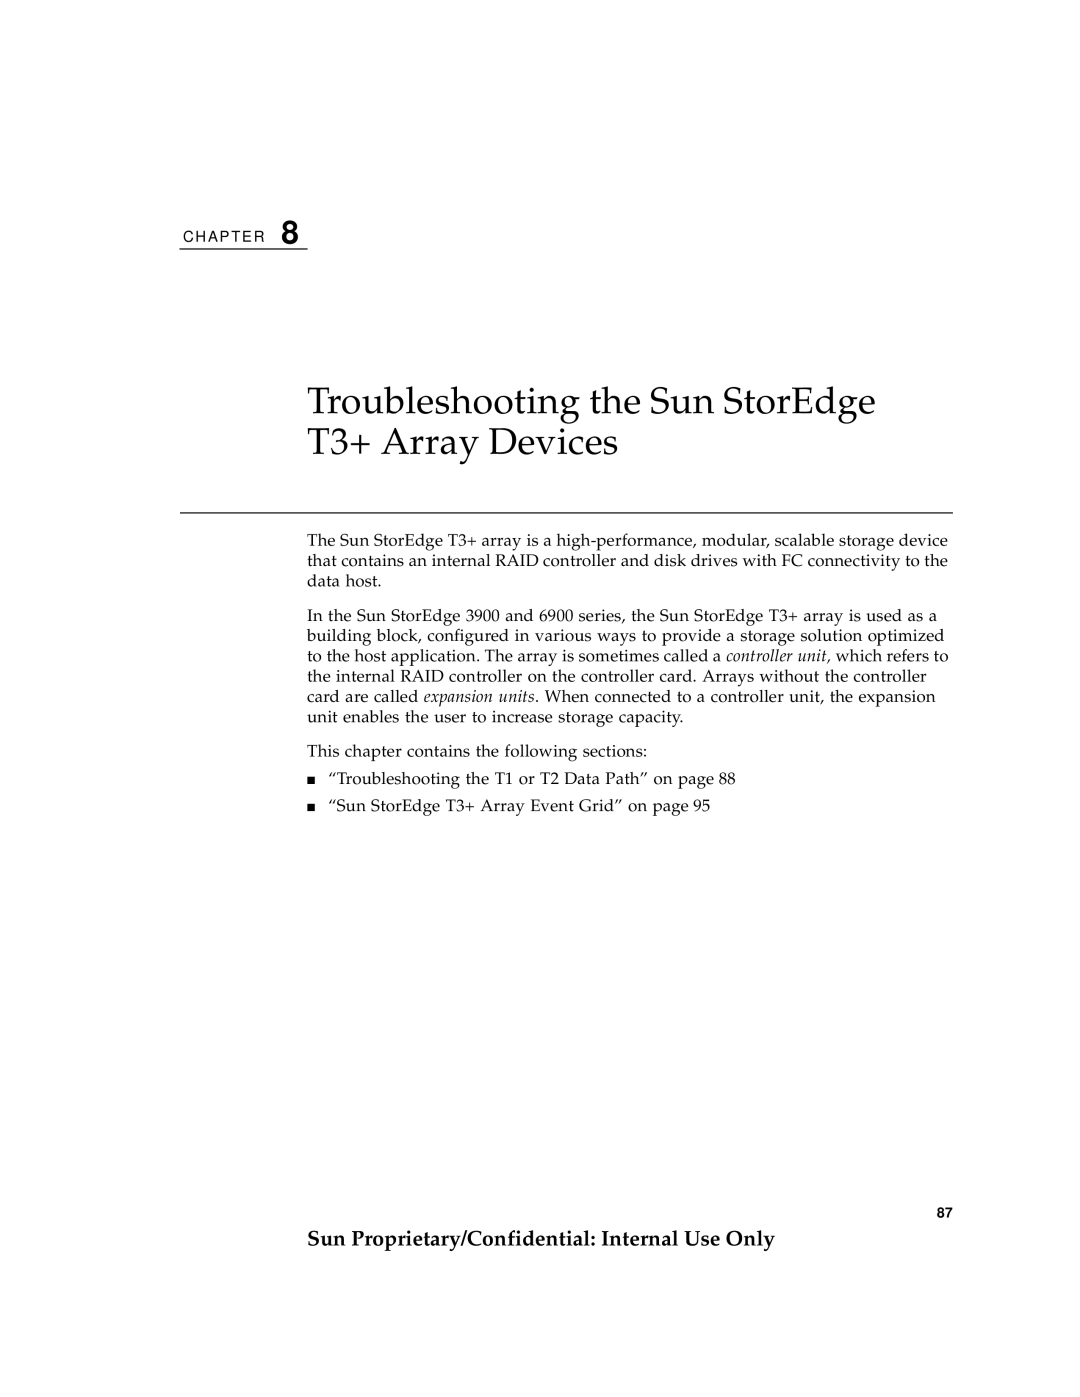 Sun Microsystems 6900 Troubleshooting the Sun StorEdge T3+ Array Devices, Sun Proprietary/Confidential Internal Use Only 